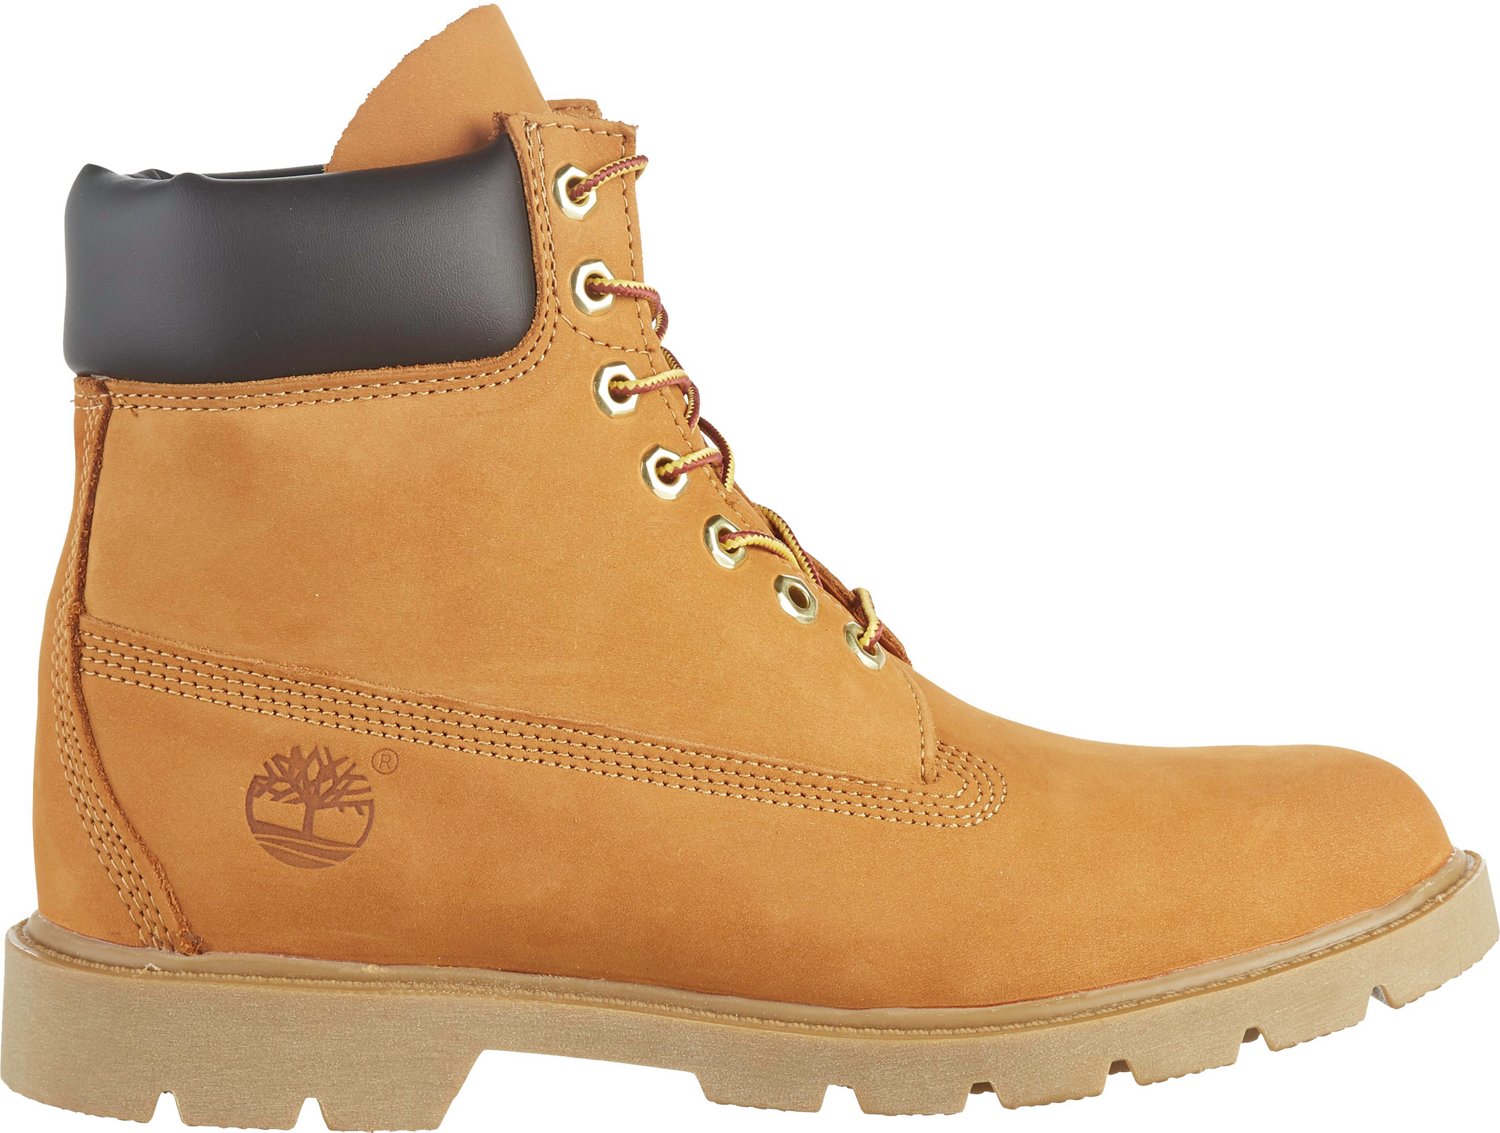 Timberland Men's Classic 6 inch Boots | Free Shipping at Academy